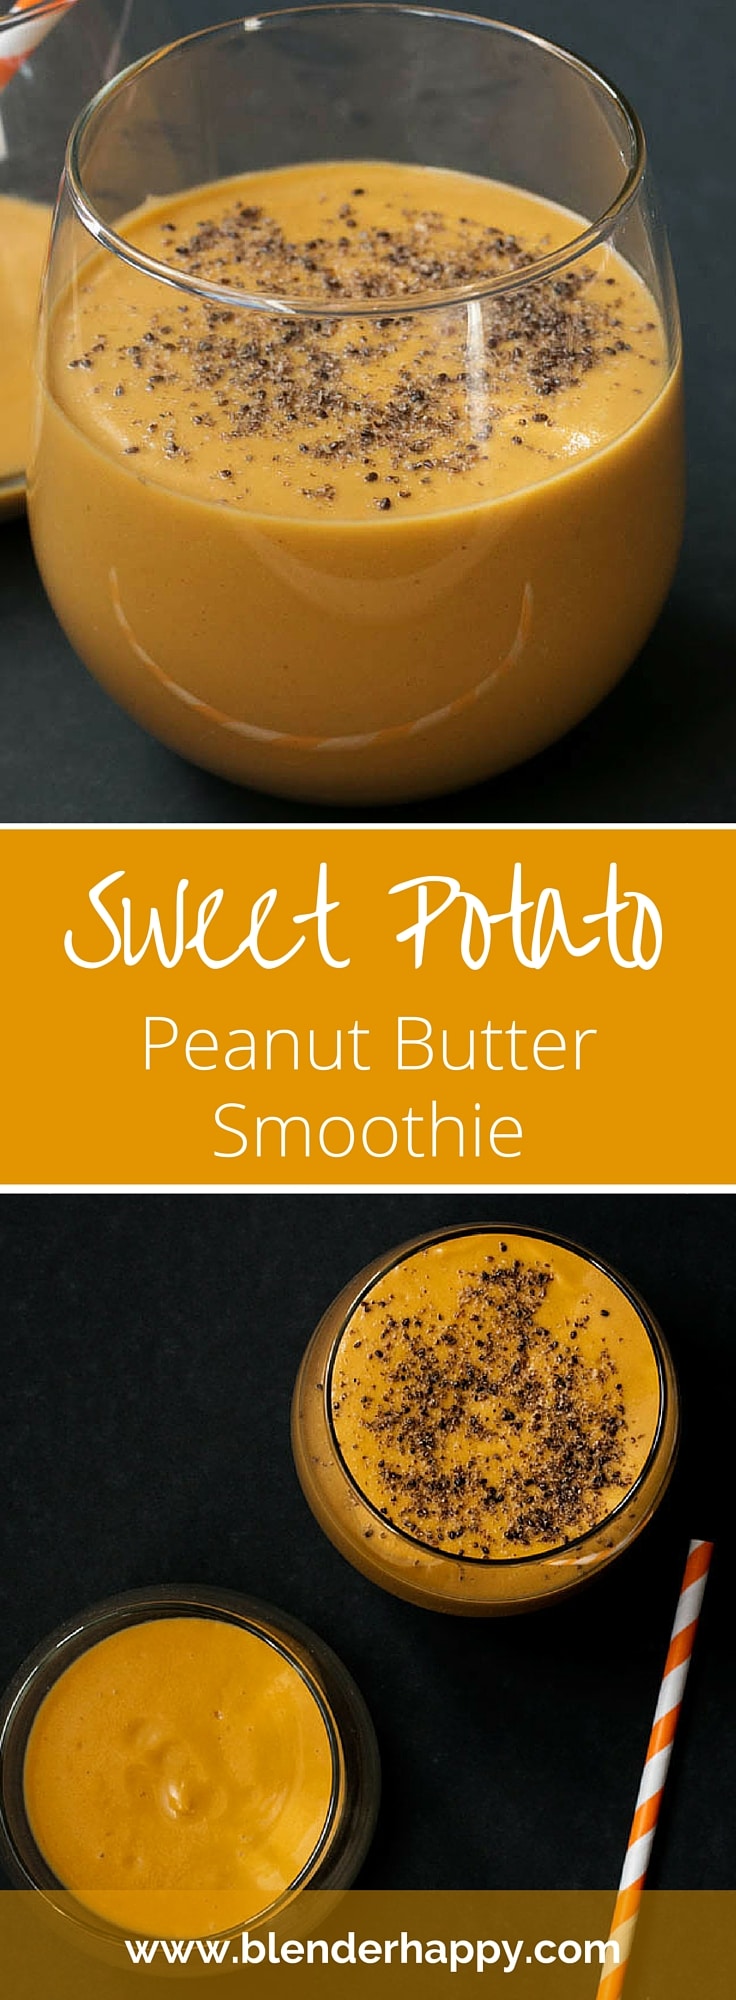 Sweet Potato Peanut Butter Smoothie delivers a tasty vegan snack or breakfast. Made with just four ingredients it is a great smoothie to add to your routine.